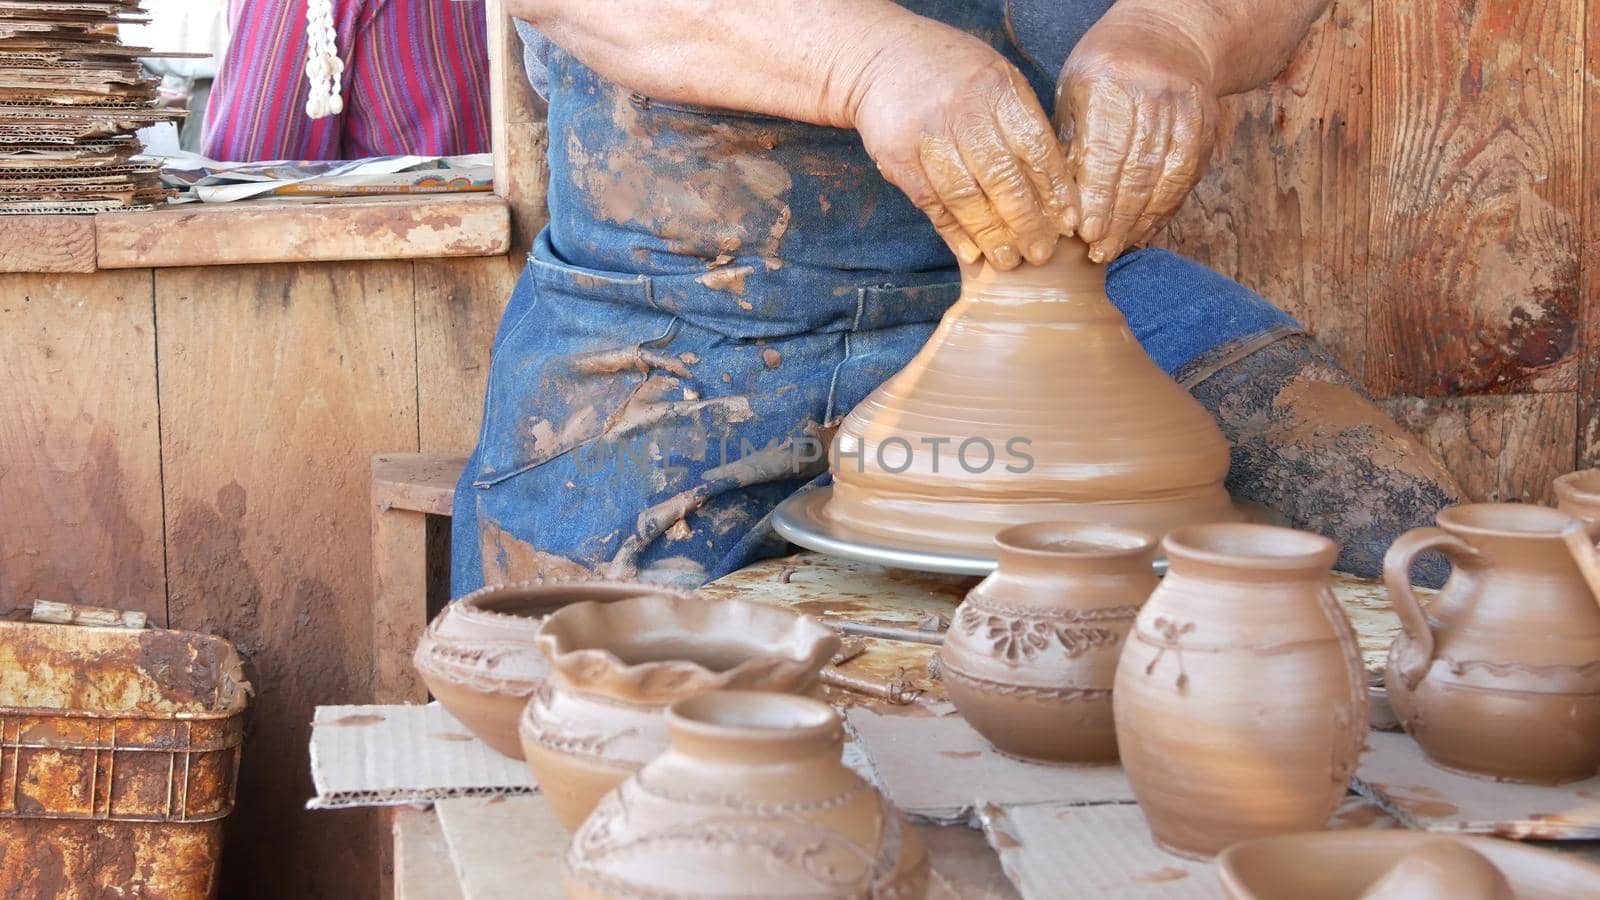 SAN DIEGO, CALIFORNIA USA - 5 JAN 2020: Potter working in mexican Oldtown, raw clay on pottery wheel. Man's hands, ceramist in process of modeling handcrafted clayware. Craftsman creating ceramic by DogoraSun